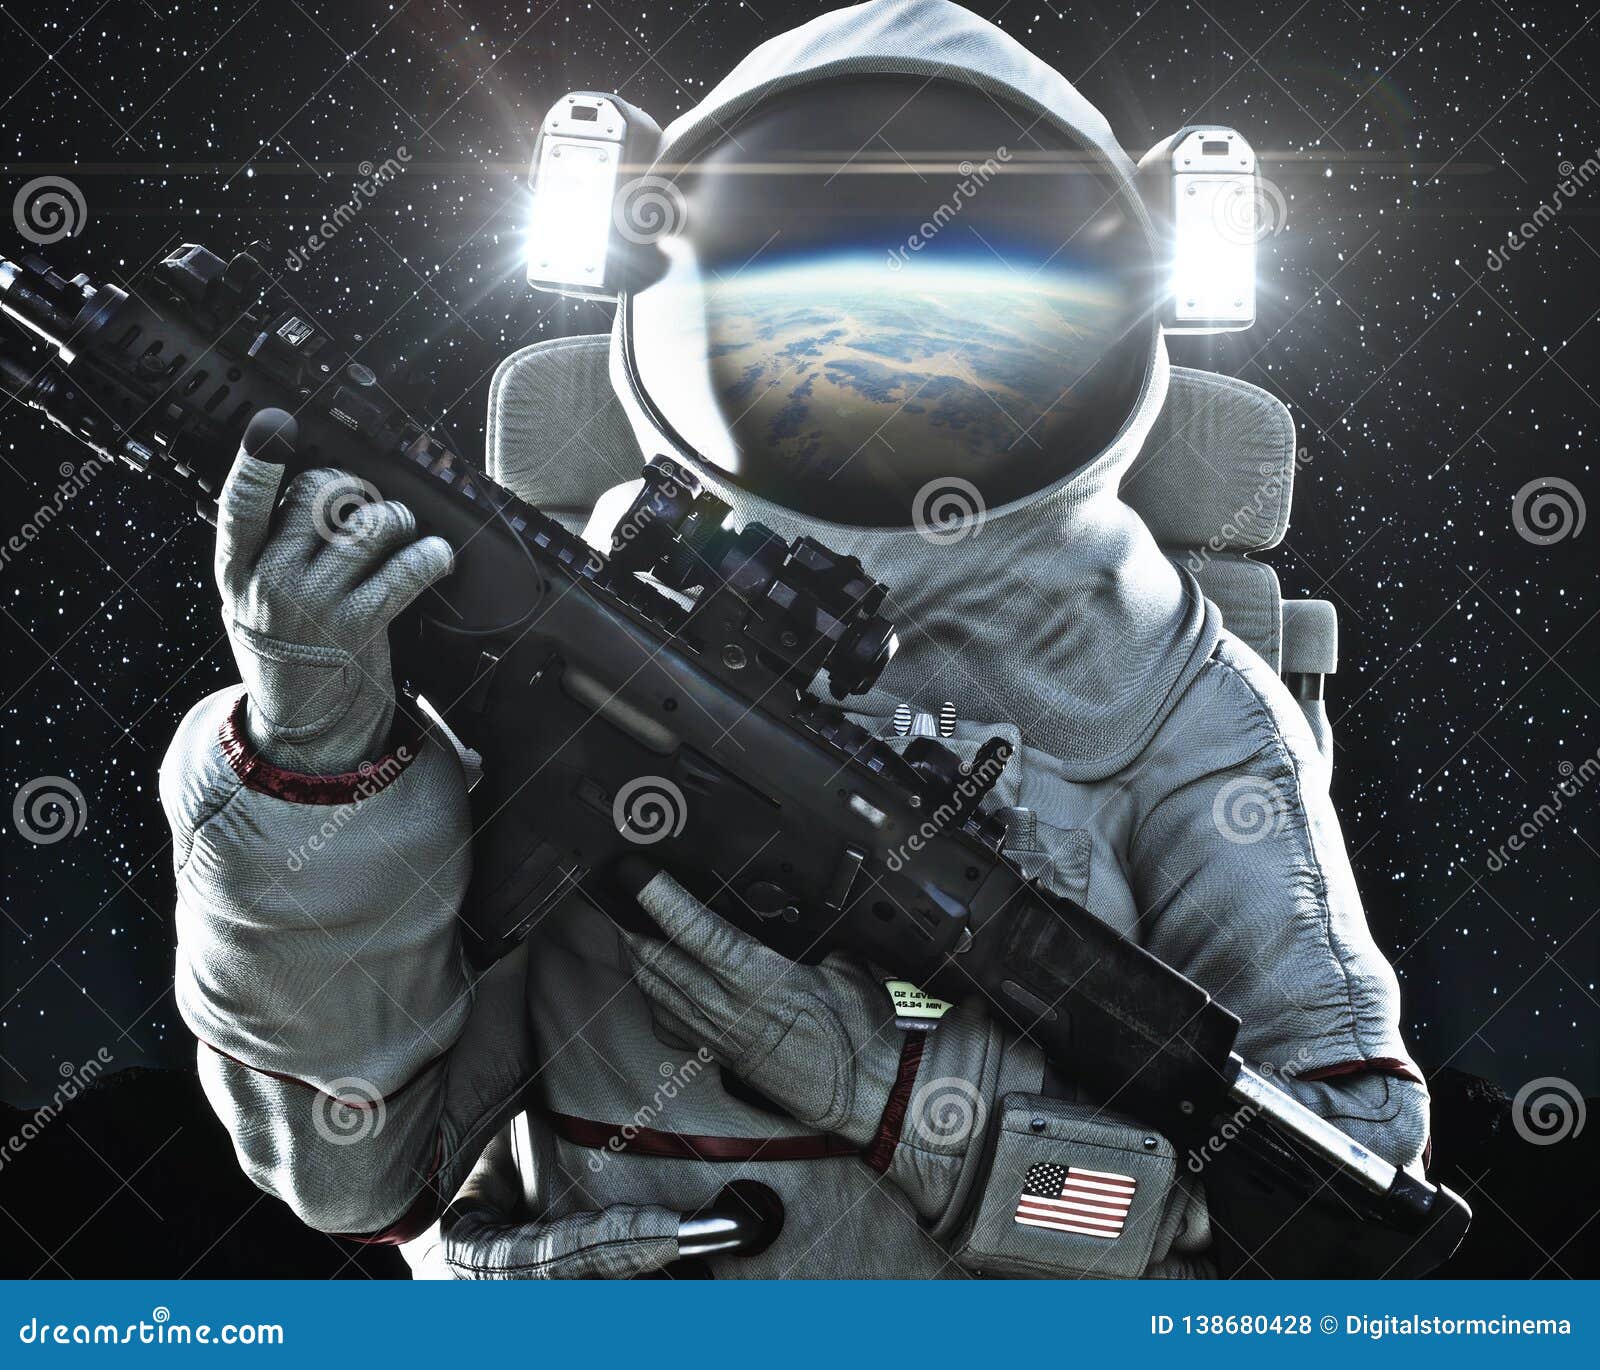 american military space force soldier holding a weapon with earth`s reflection in the helmet.